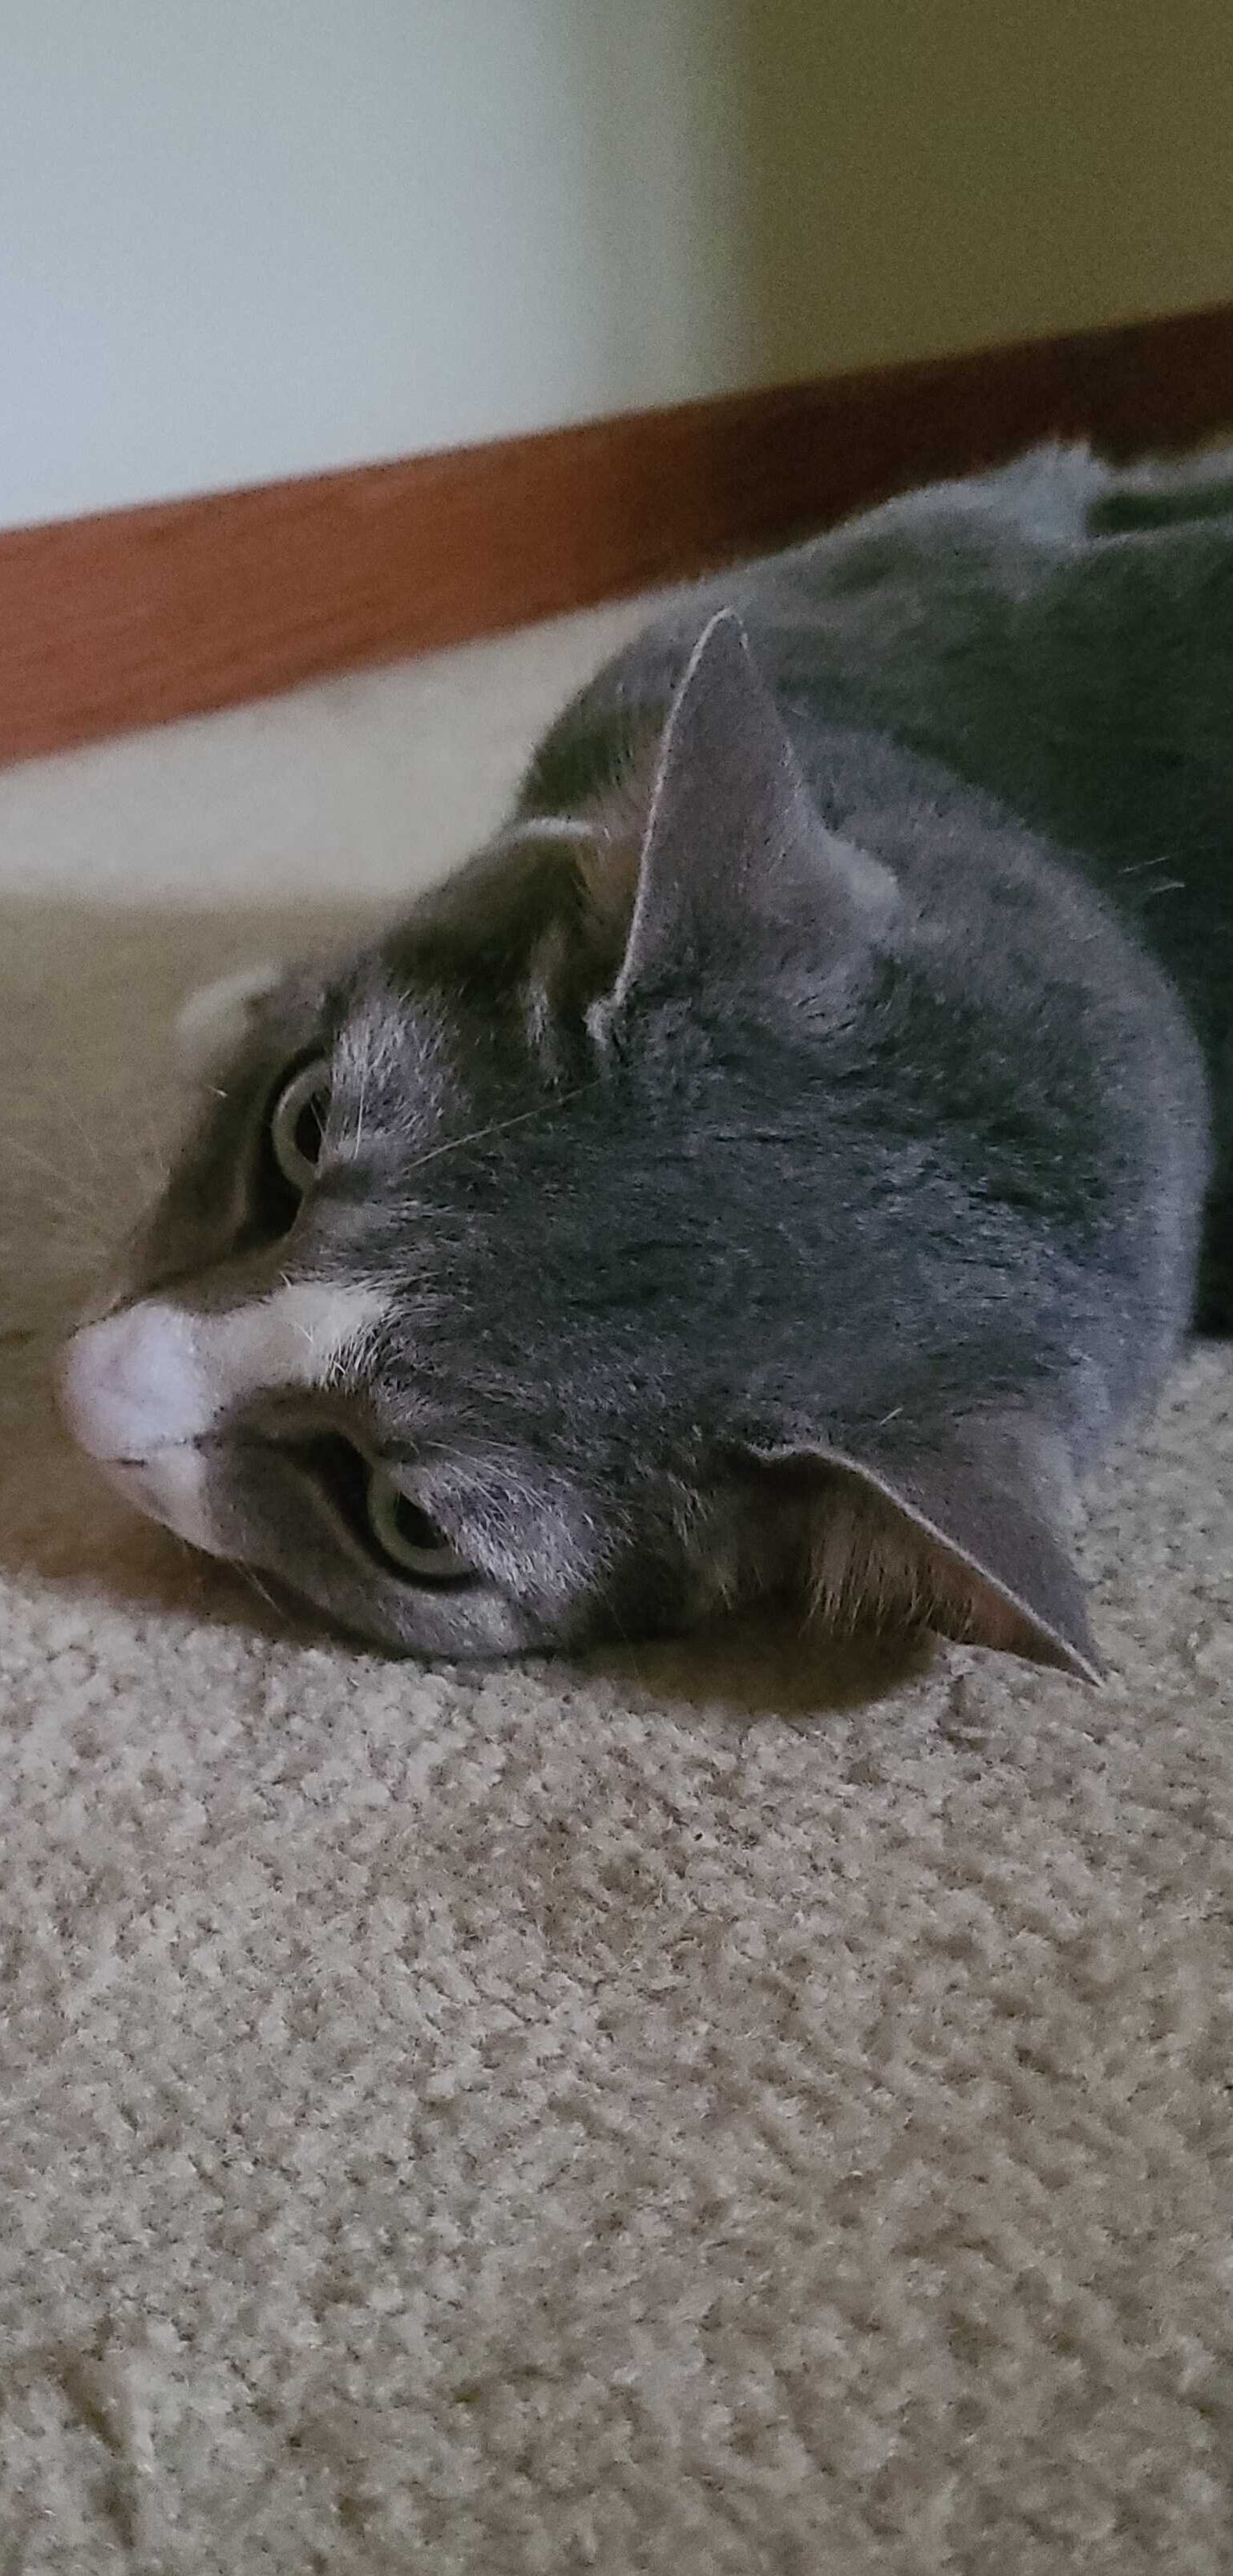  A cat laying on their side on carpet with only their head and part of their body visible  